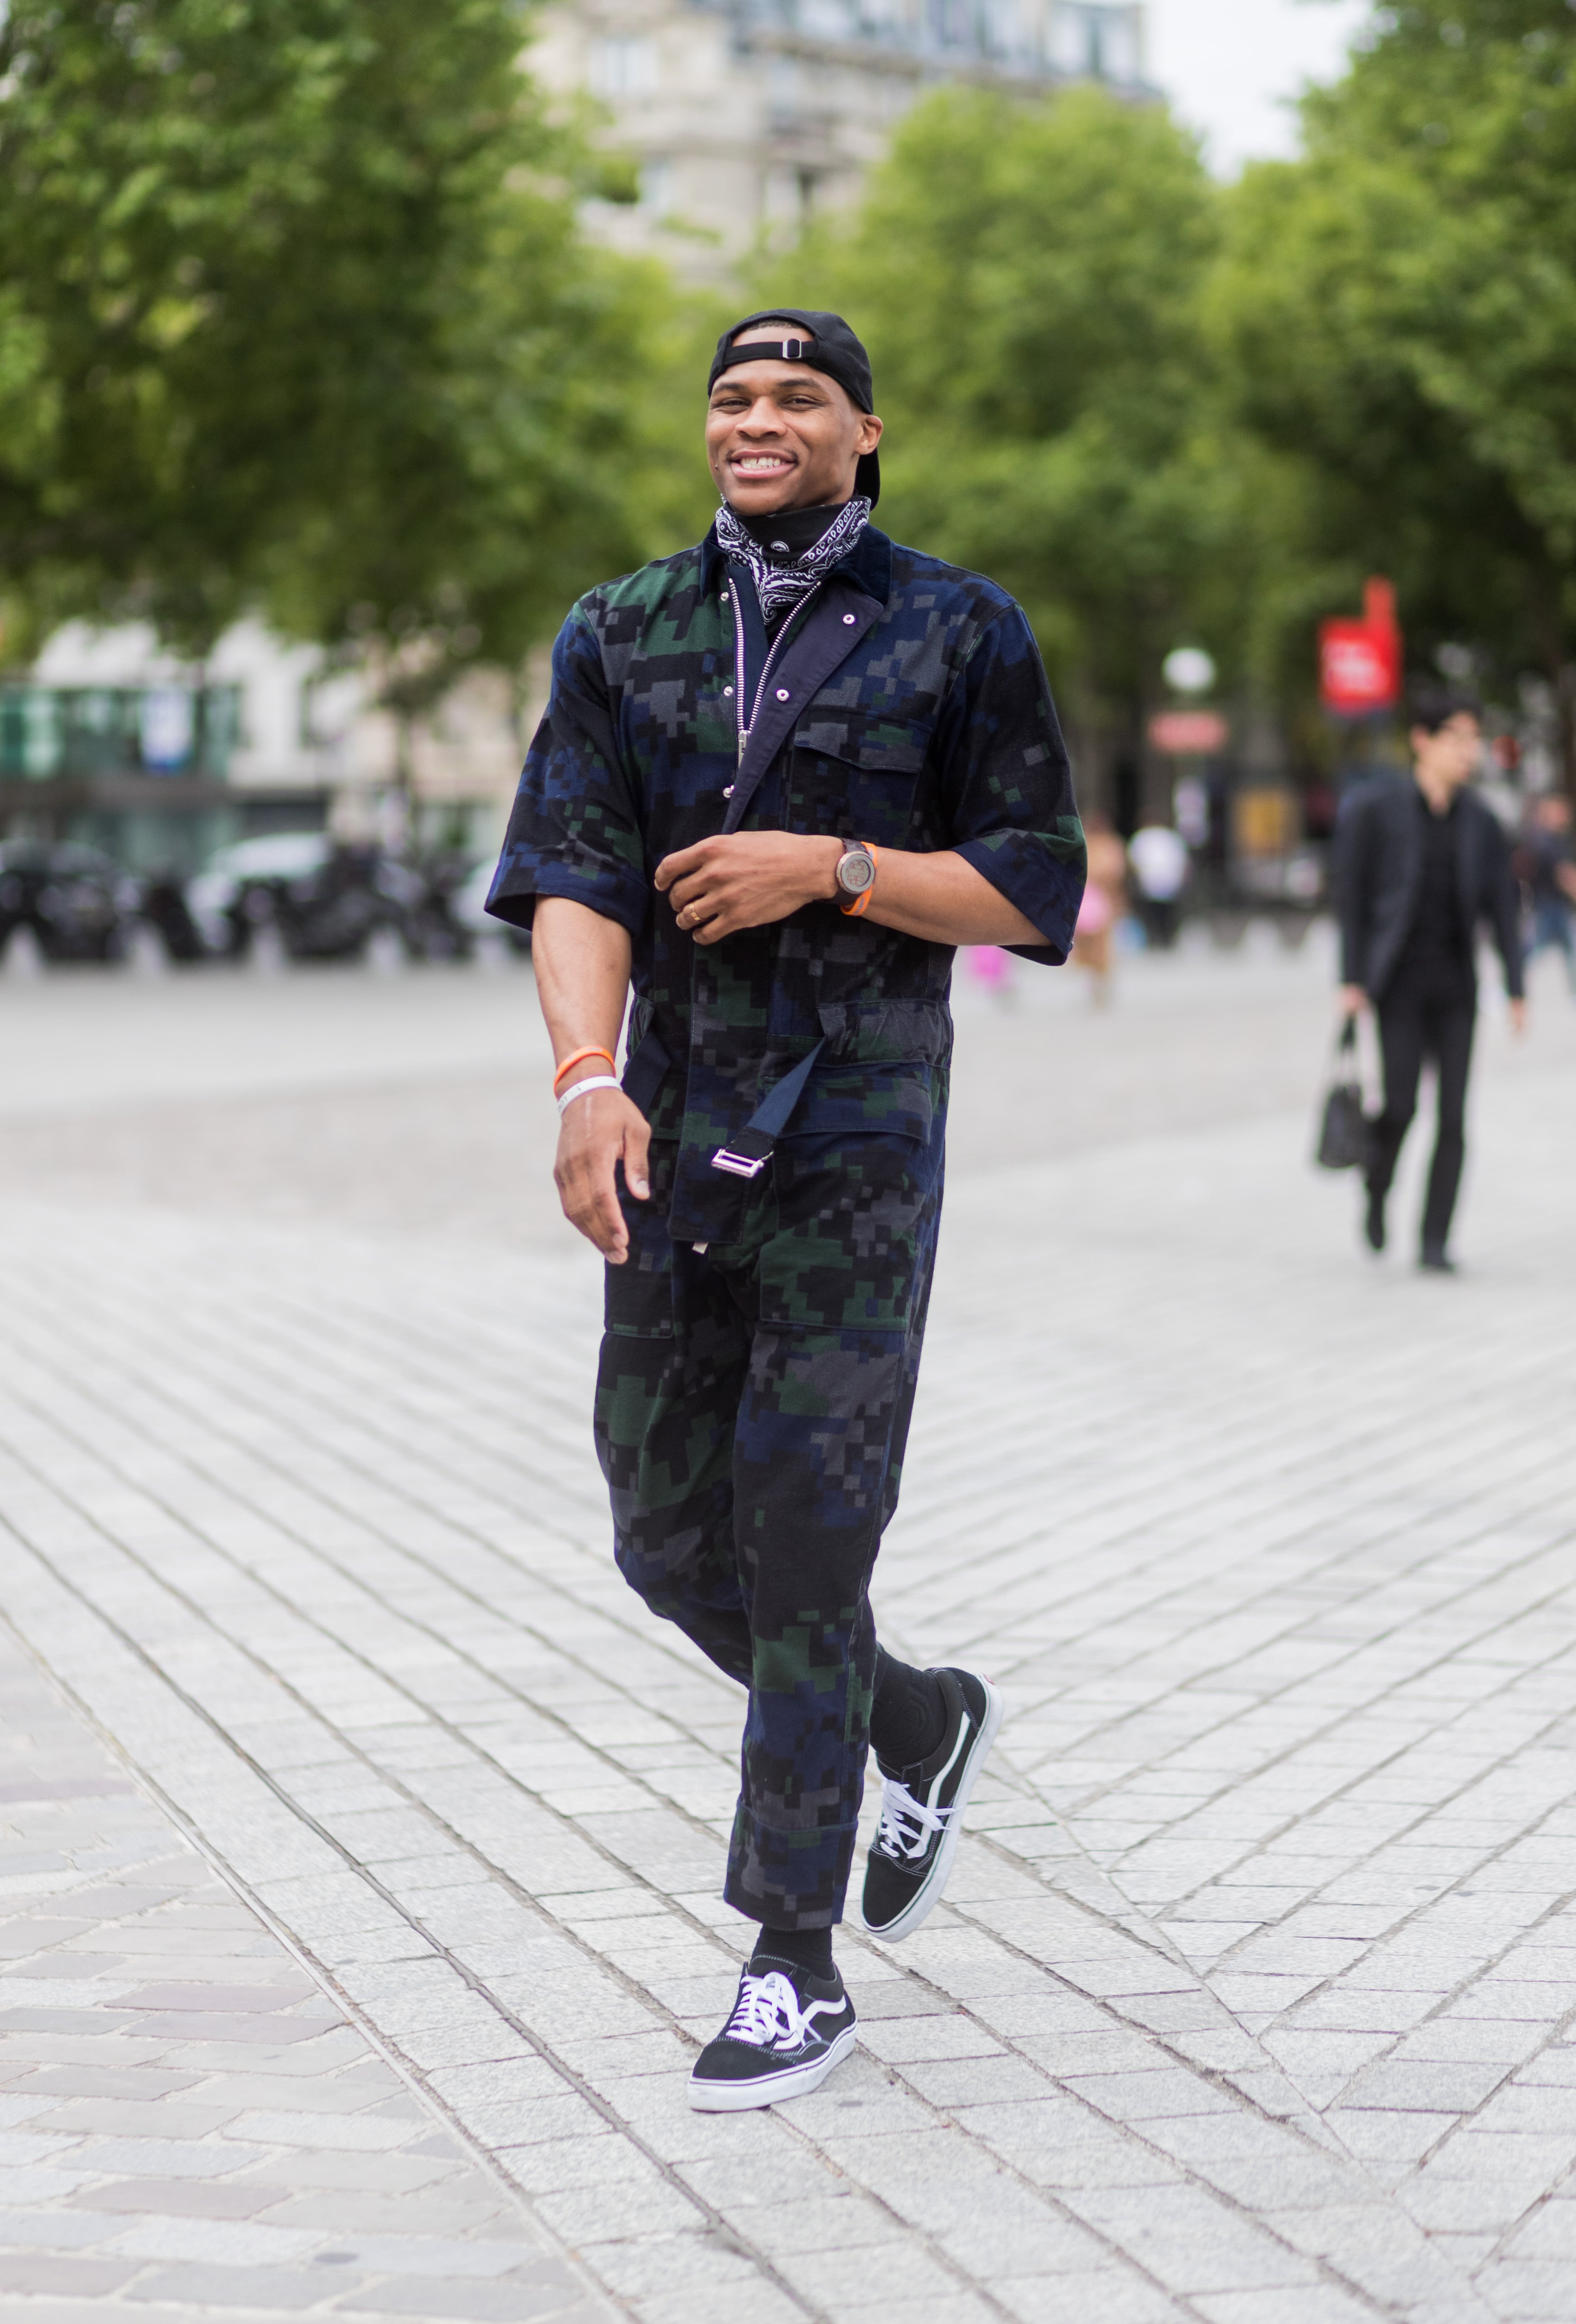 Russell Westbrook is back at New York Fashion Week as the 'Fashion King